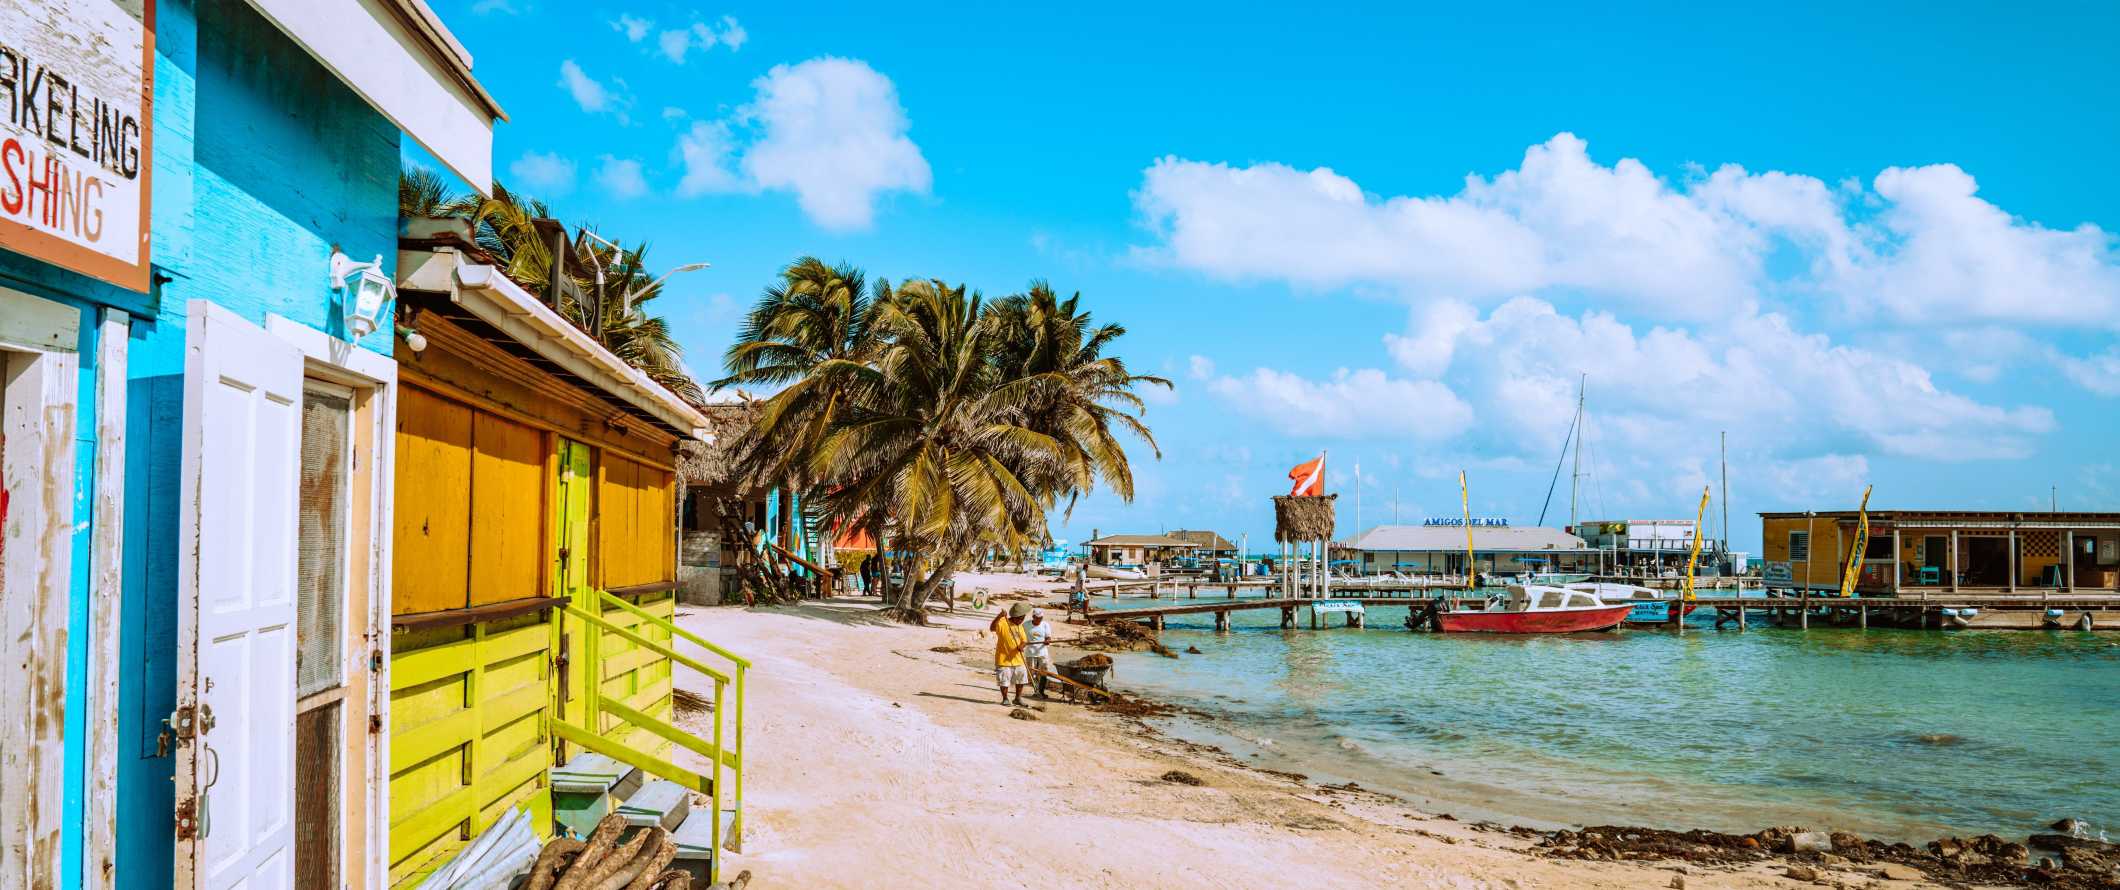 Brightly colored buildings along the beach, lined tropical palm trees in Belize